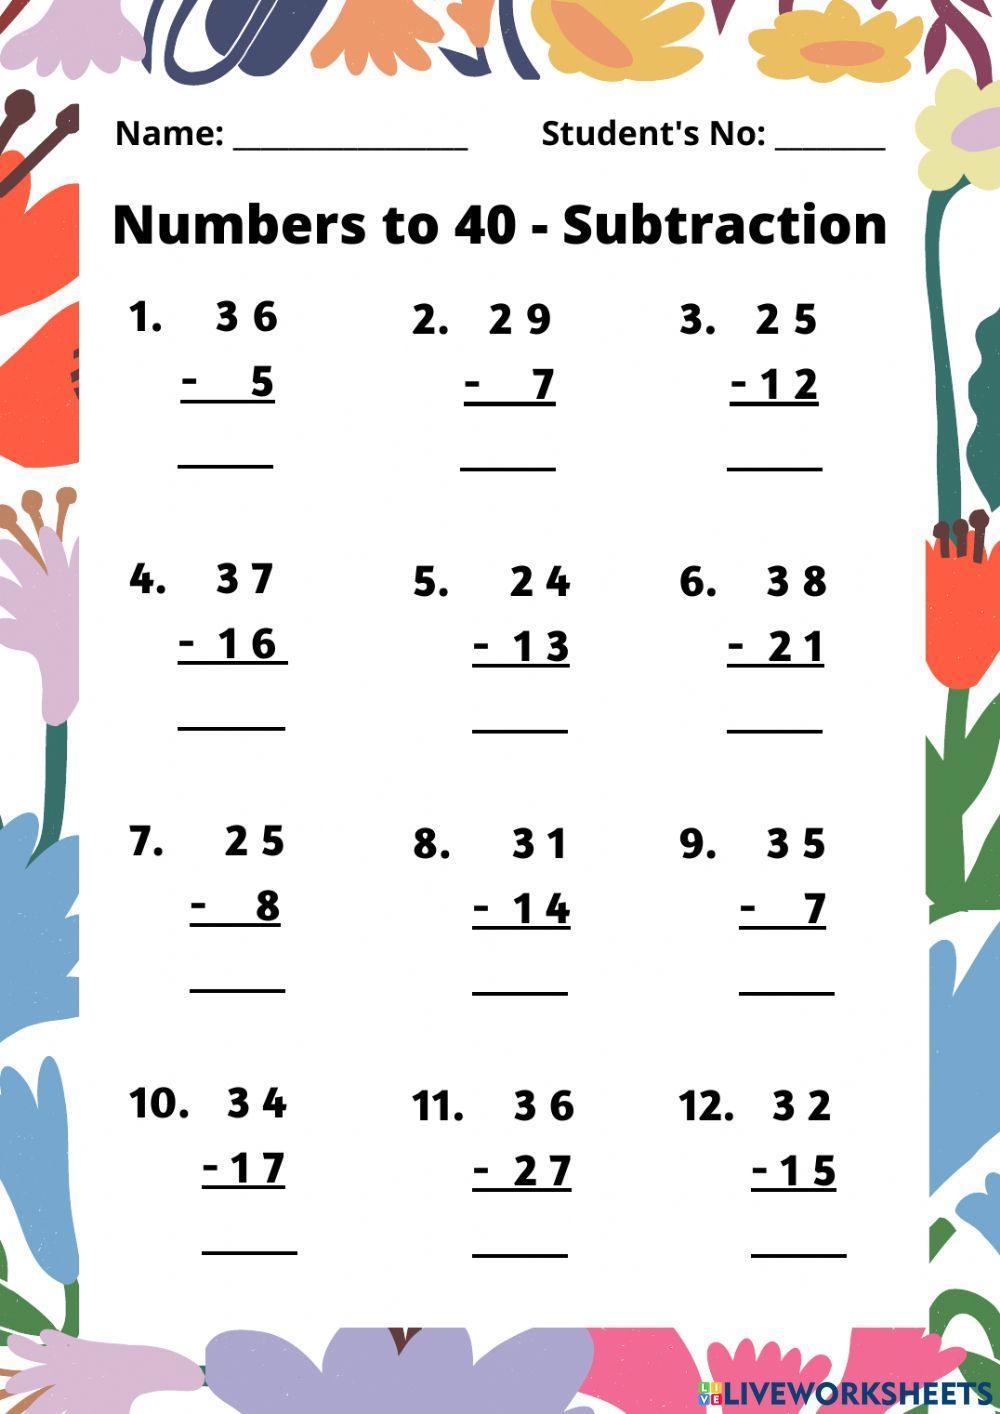 WS 7 - Subtraction to 40 with regrouping